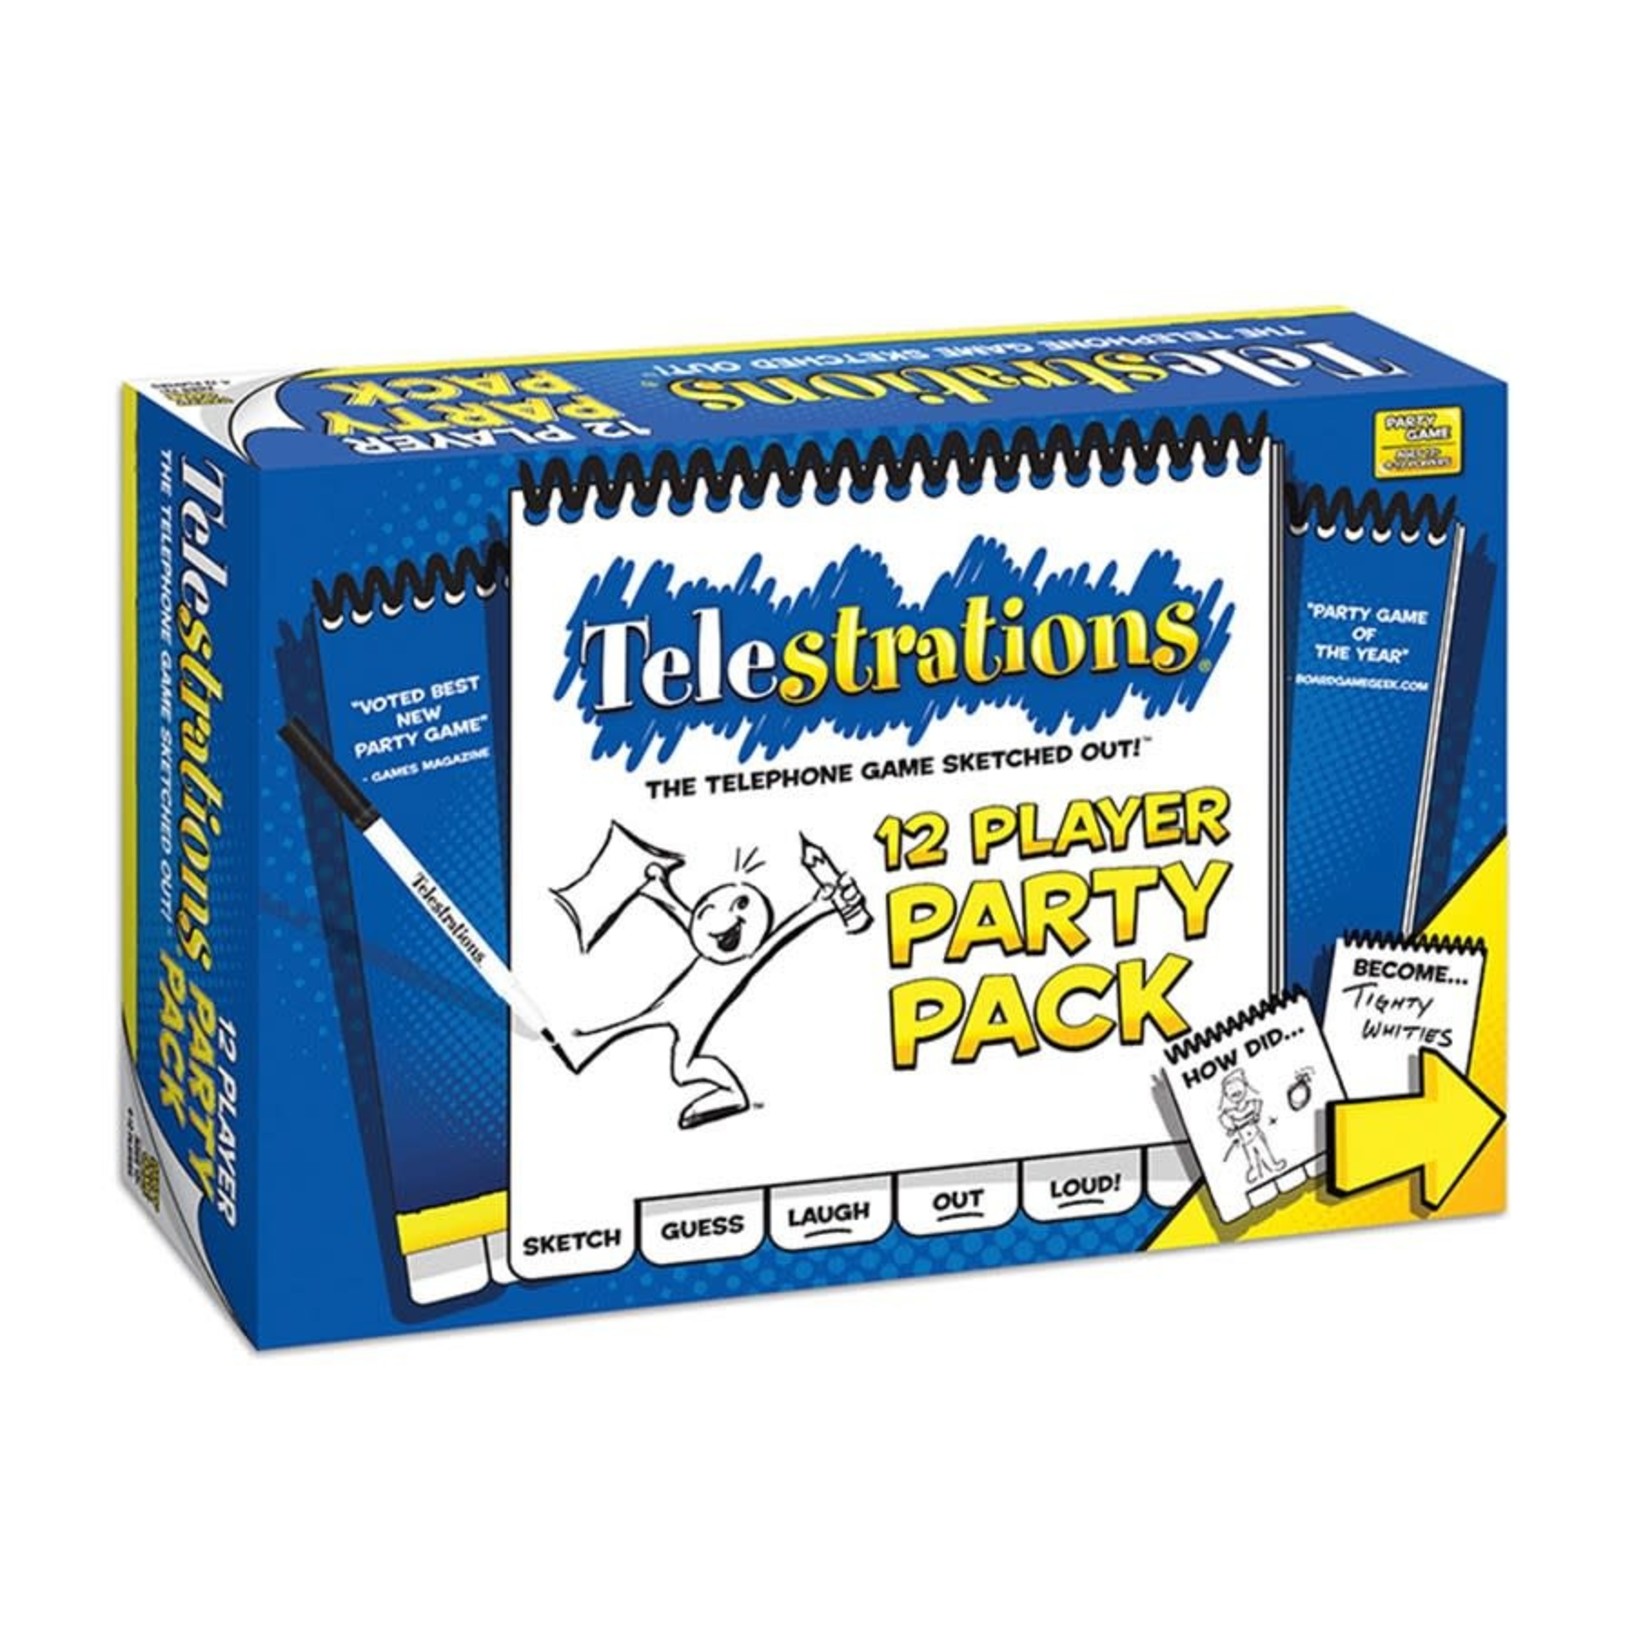 The OP-USAopoly Telestrations 12 Player Party Pack